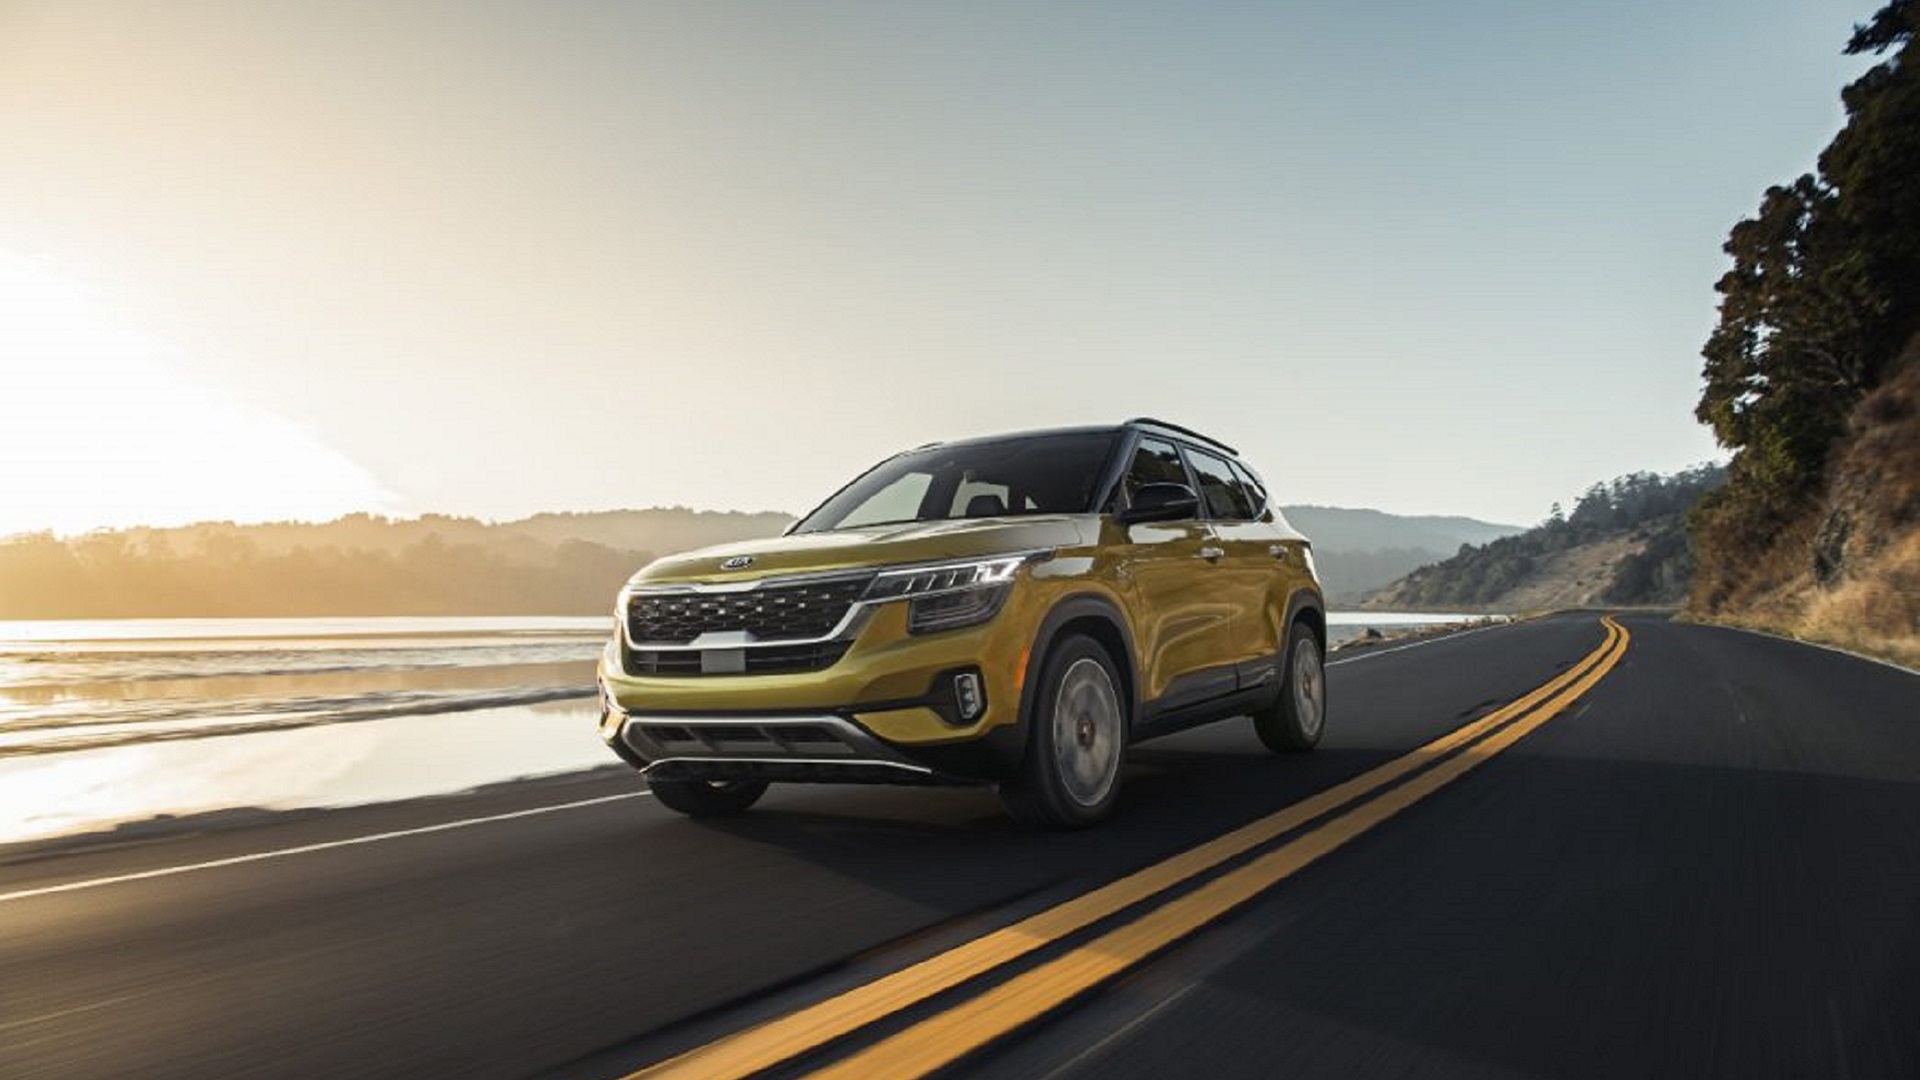 All-new 2021 Kia Seltos blends ruggedness and refinement in entry SUV  segment